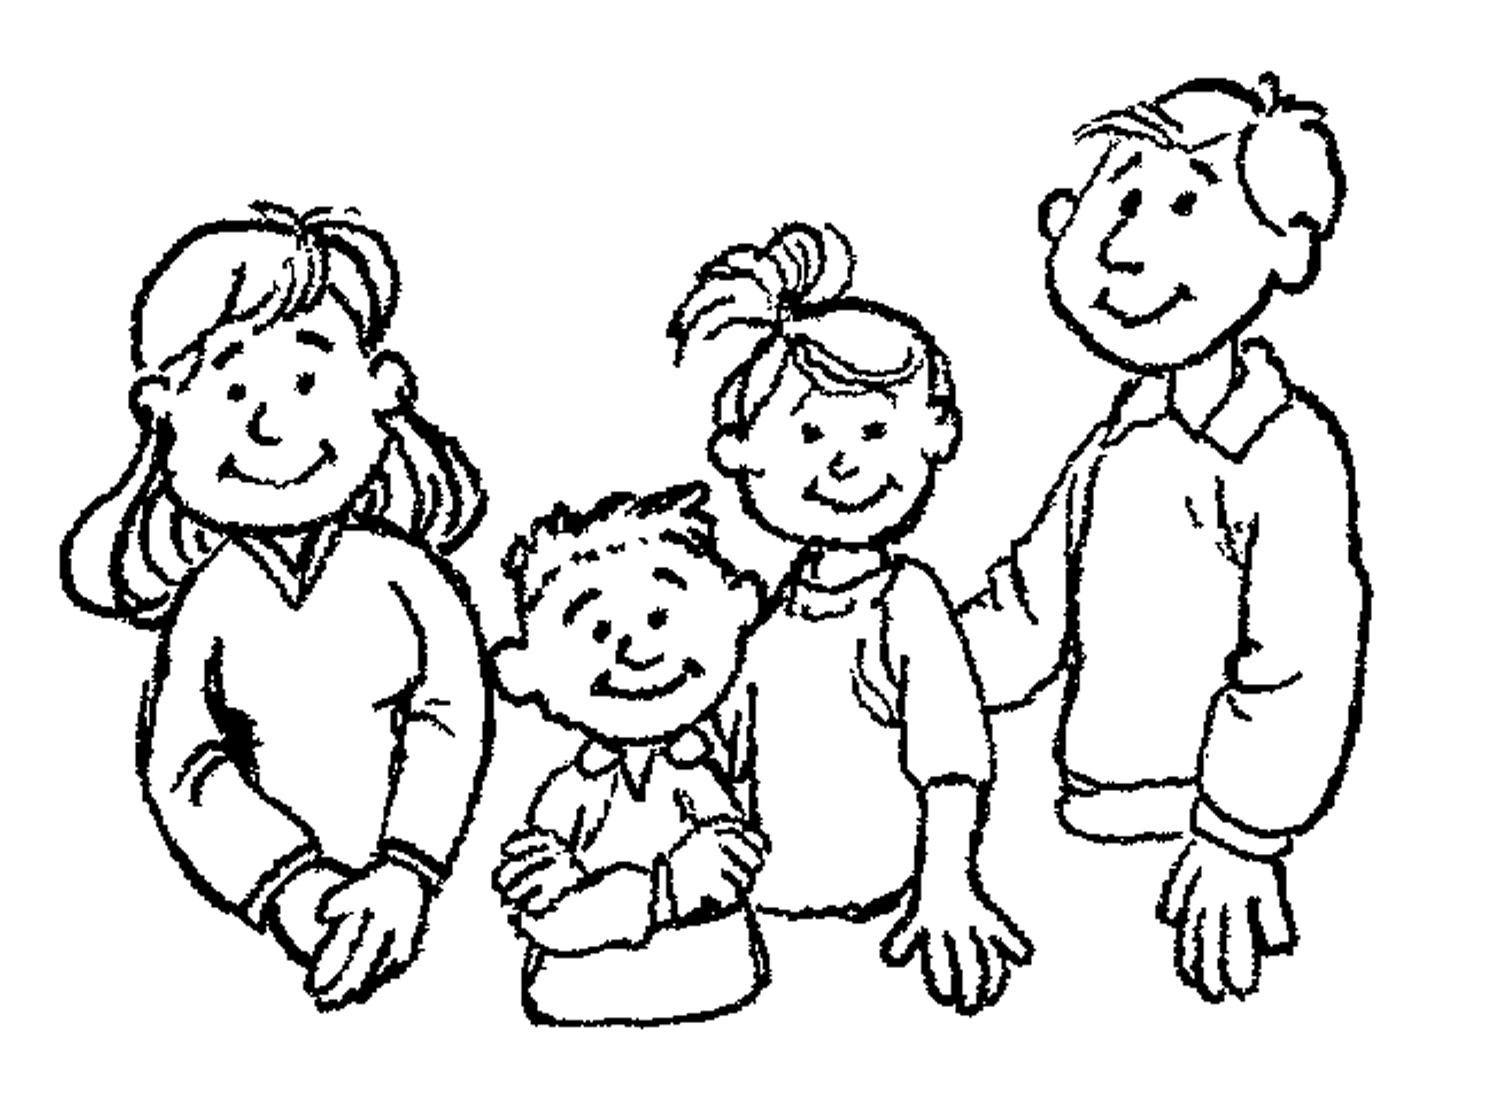 Family black and white clipart black and white family